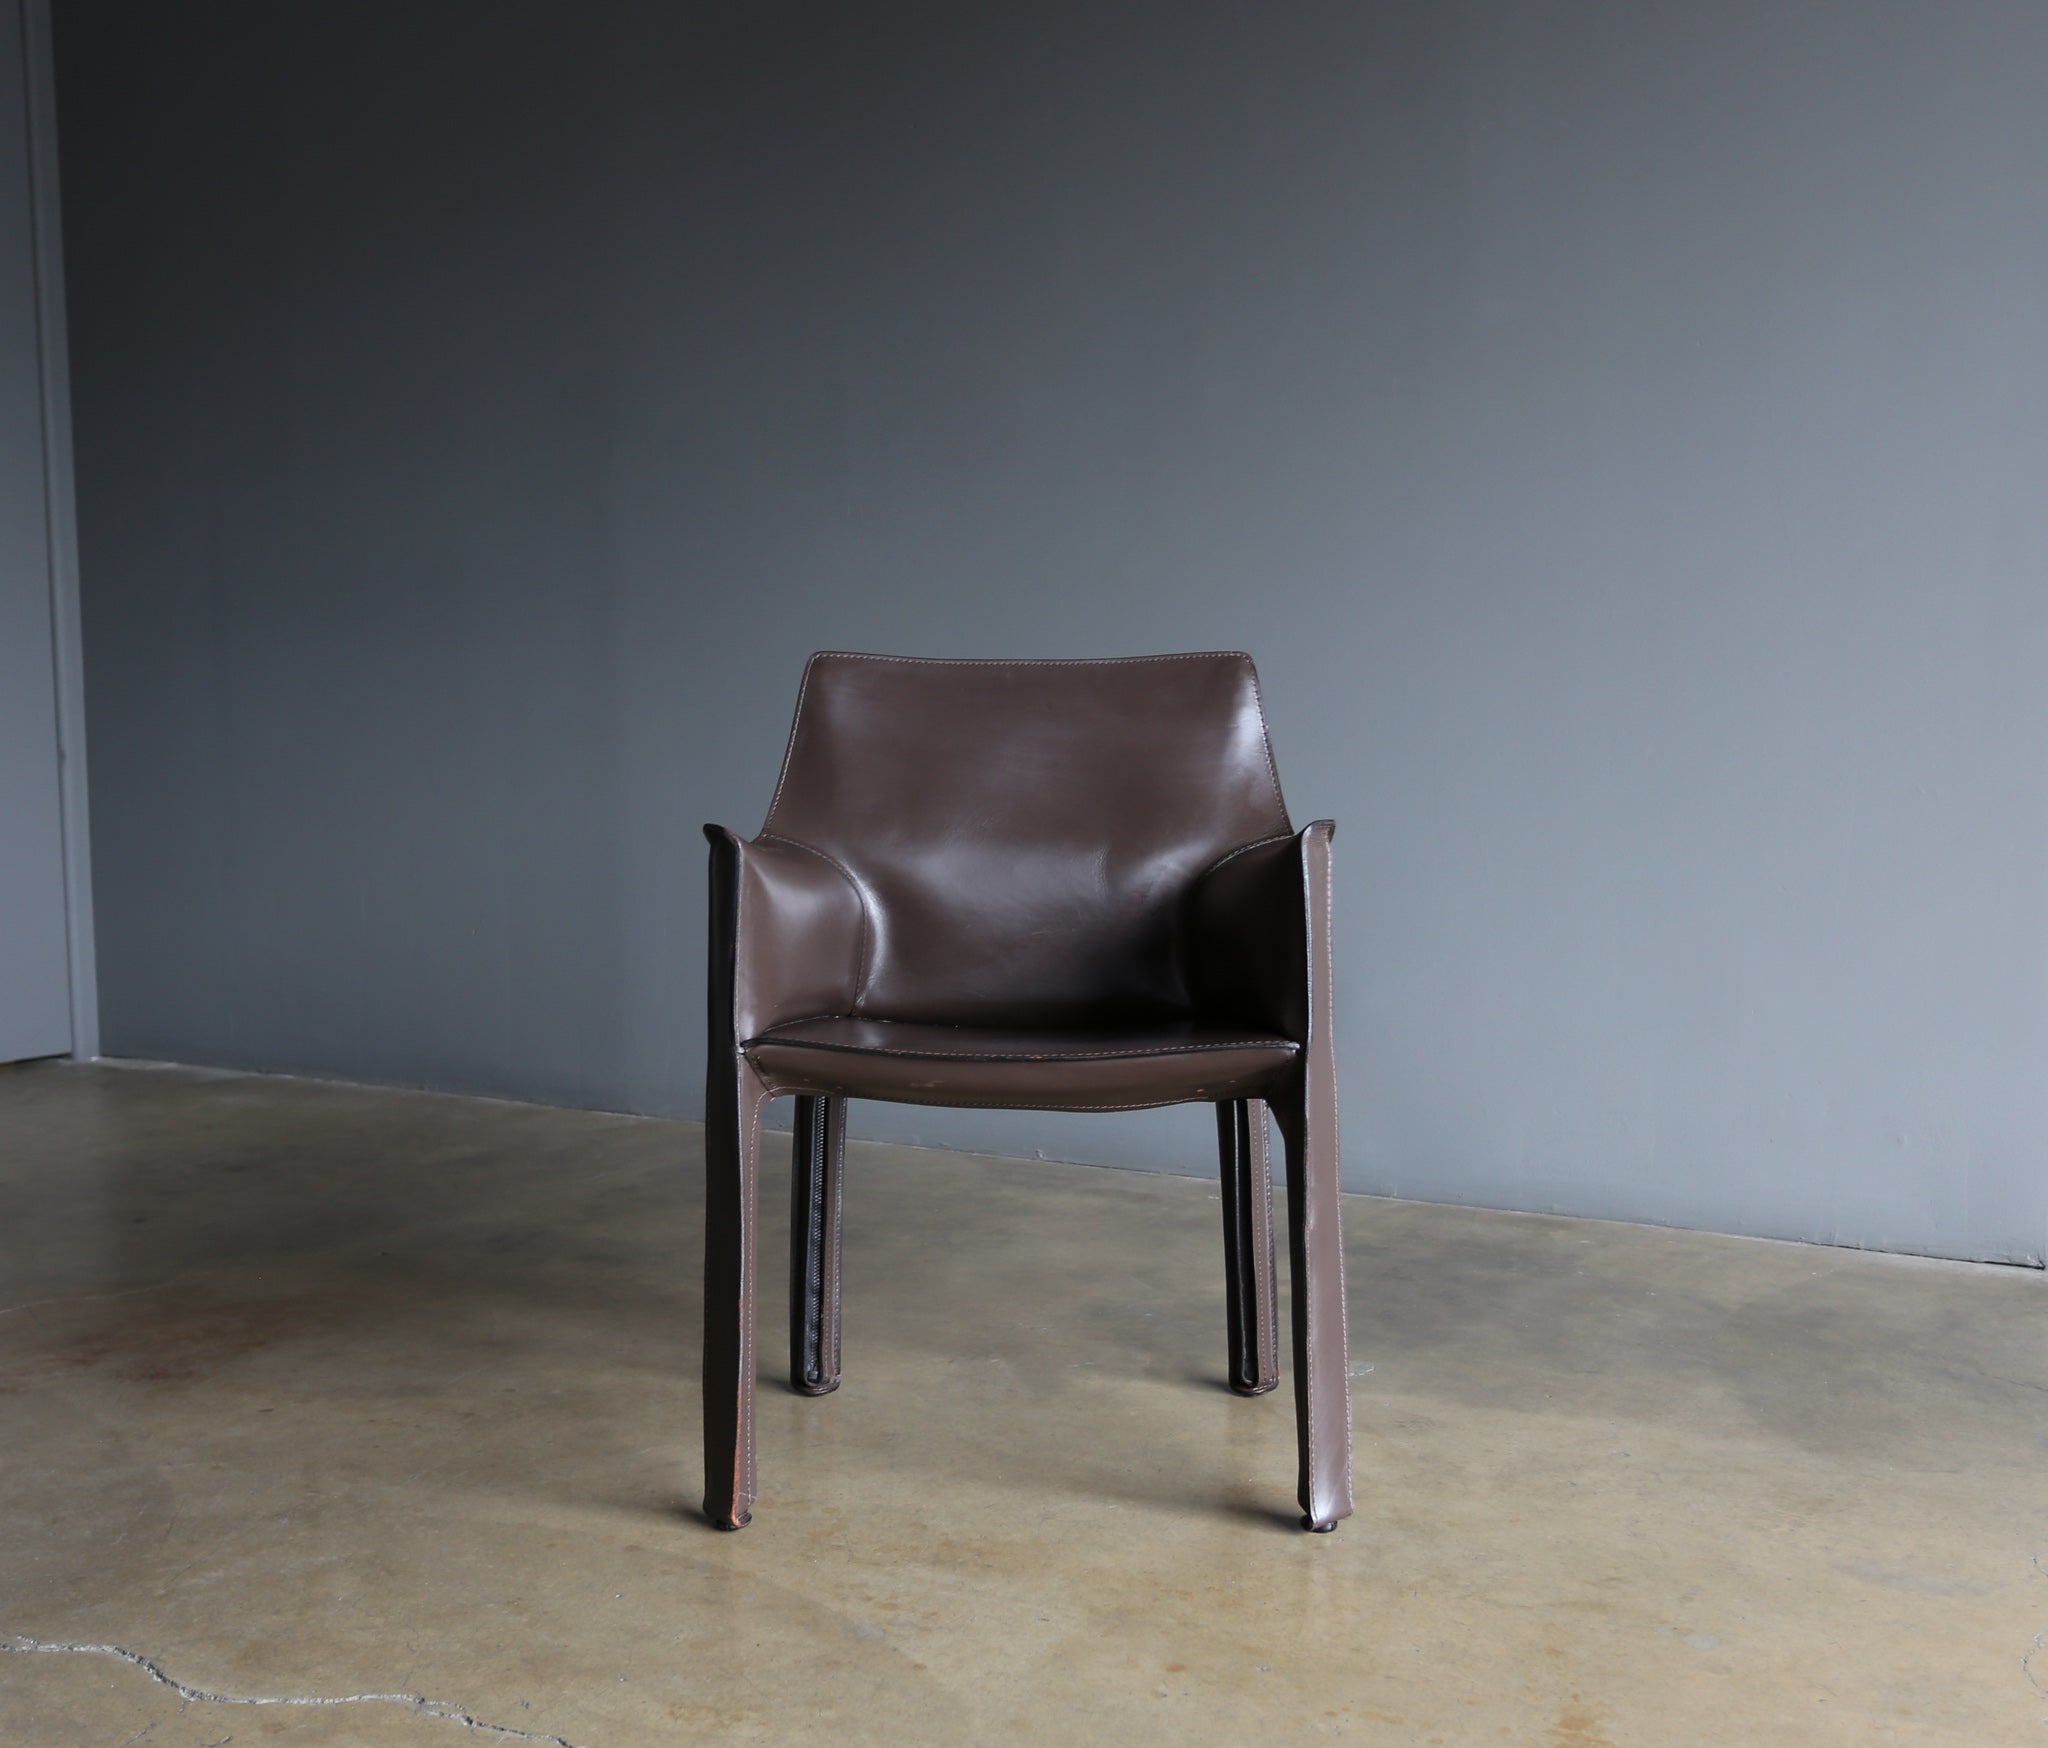 = SOLD = Mario Bellini Brown Leather "Cab" Chairs for Cassina